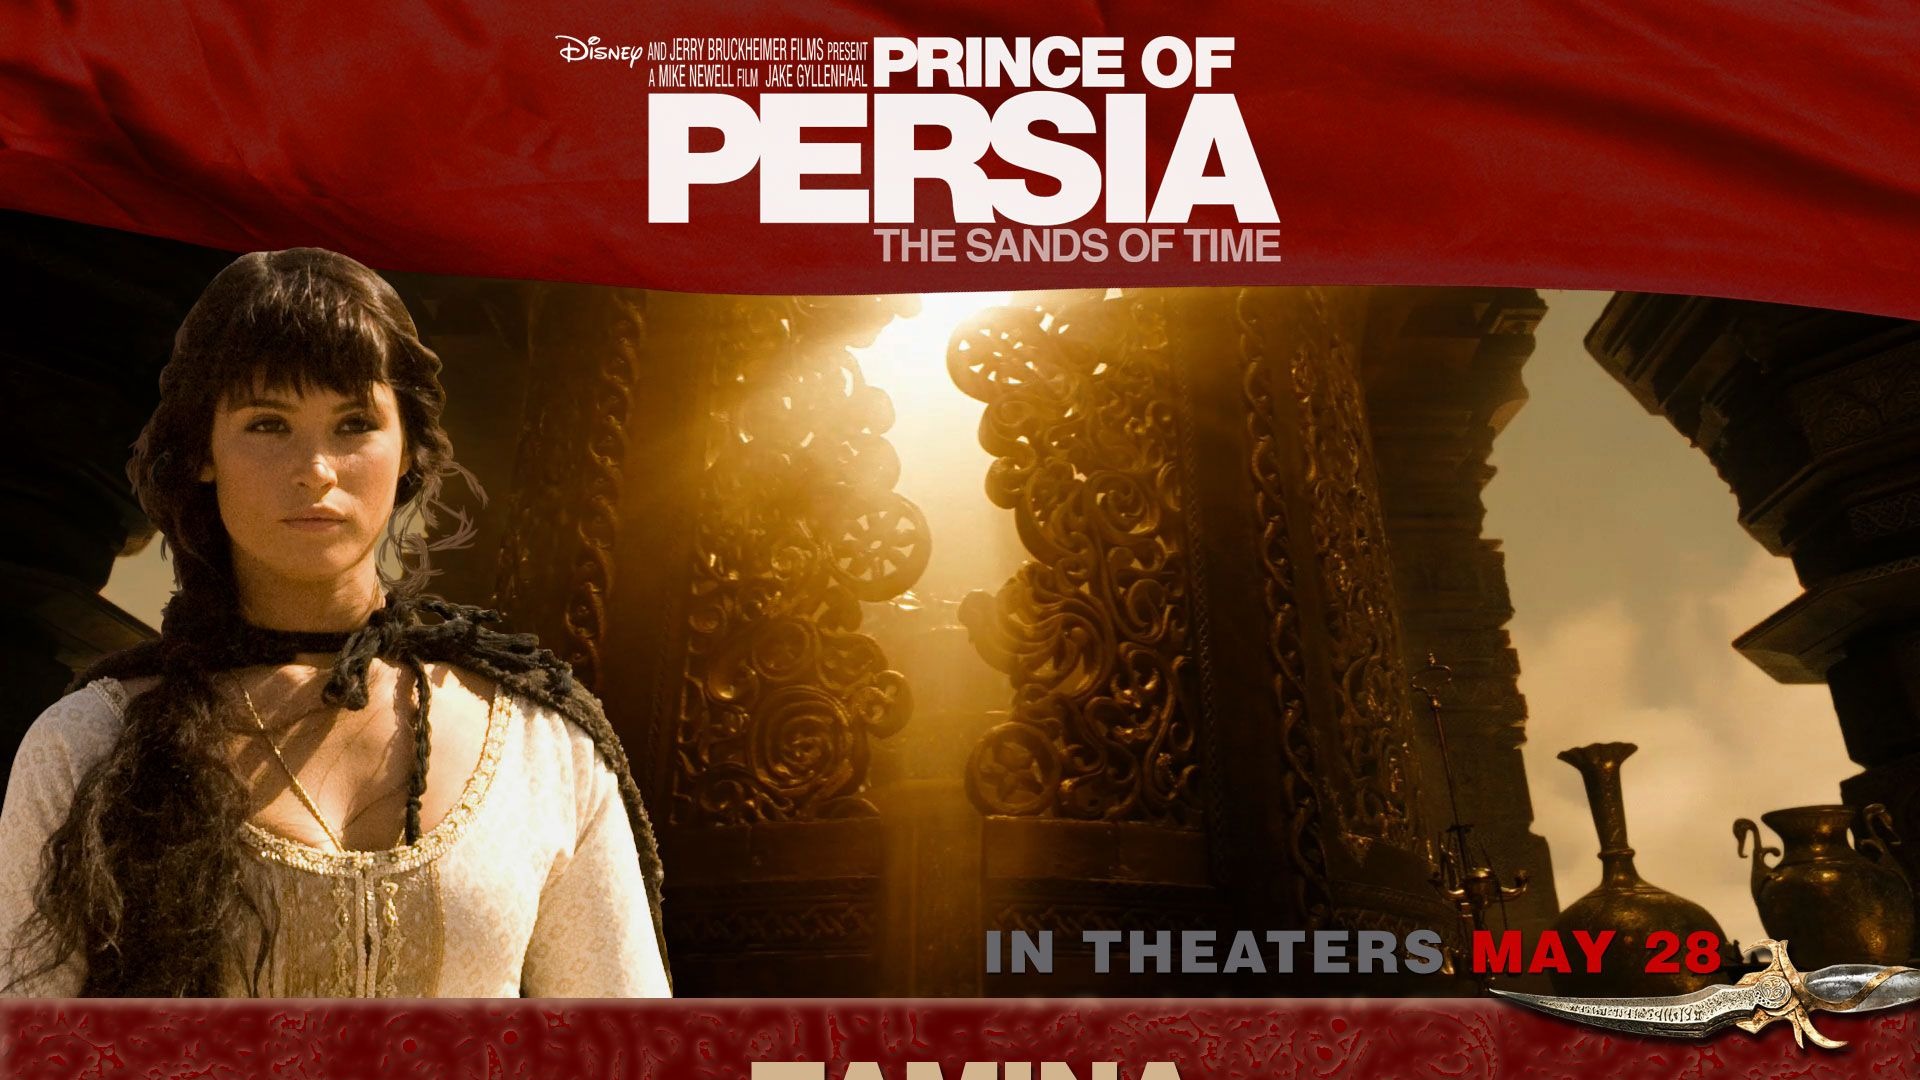 Prince of Persia The Sands of Time 波斯王子：时之刃36 - 1920x1080